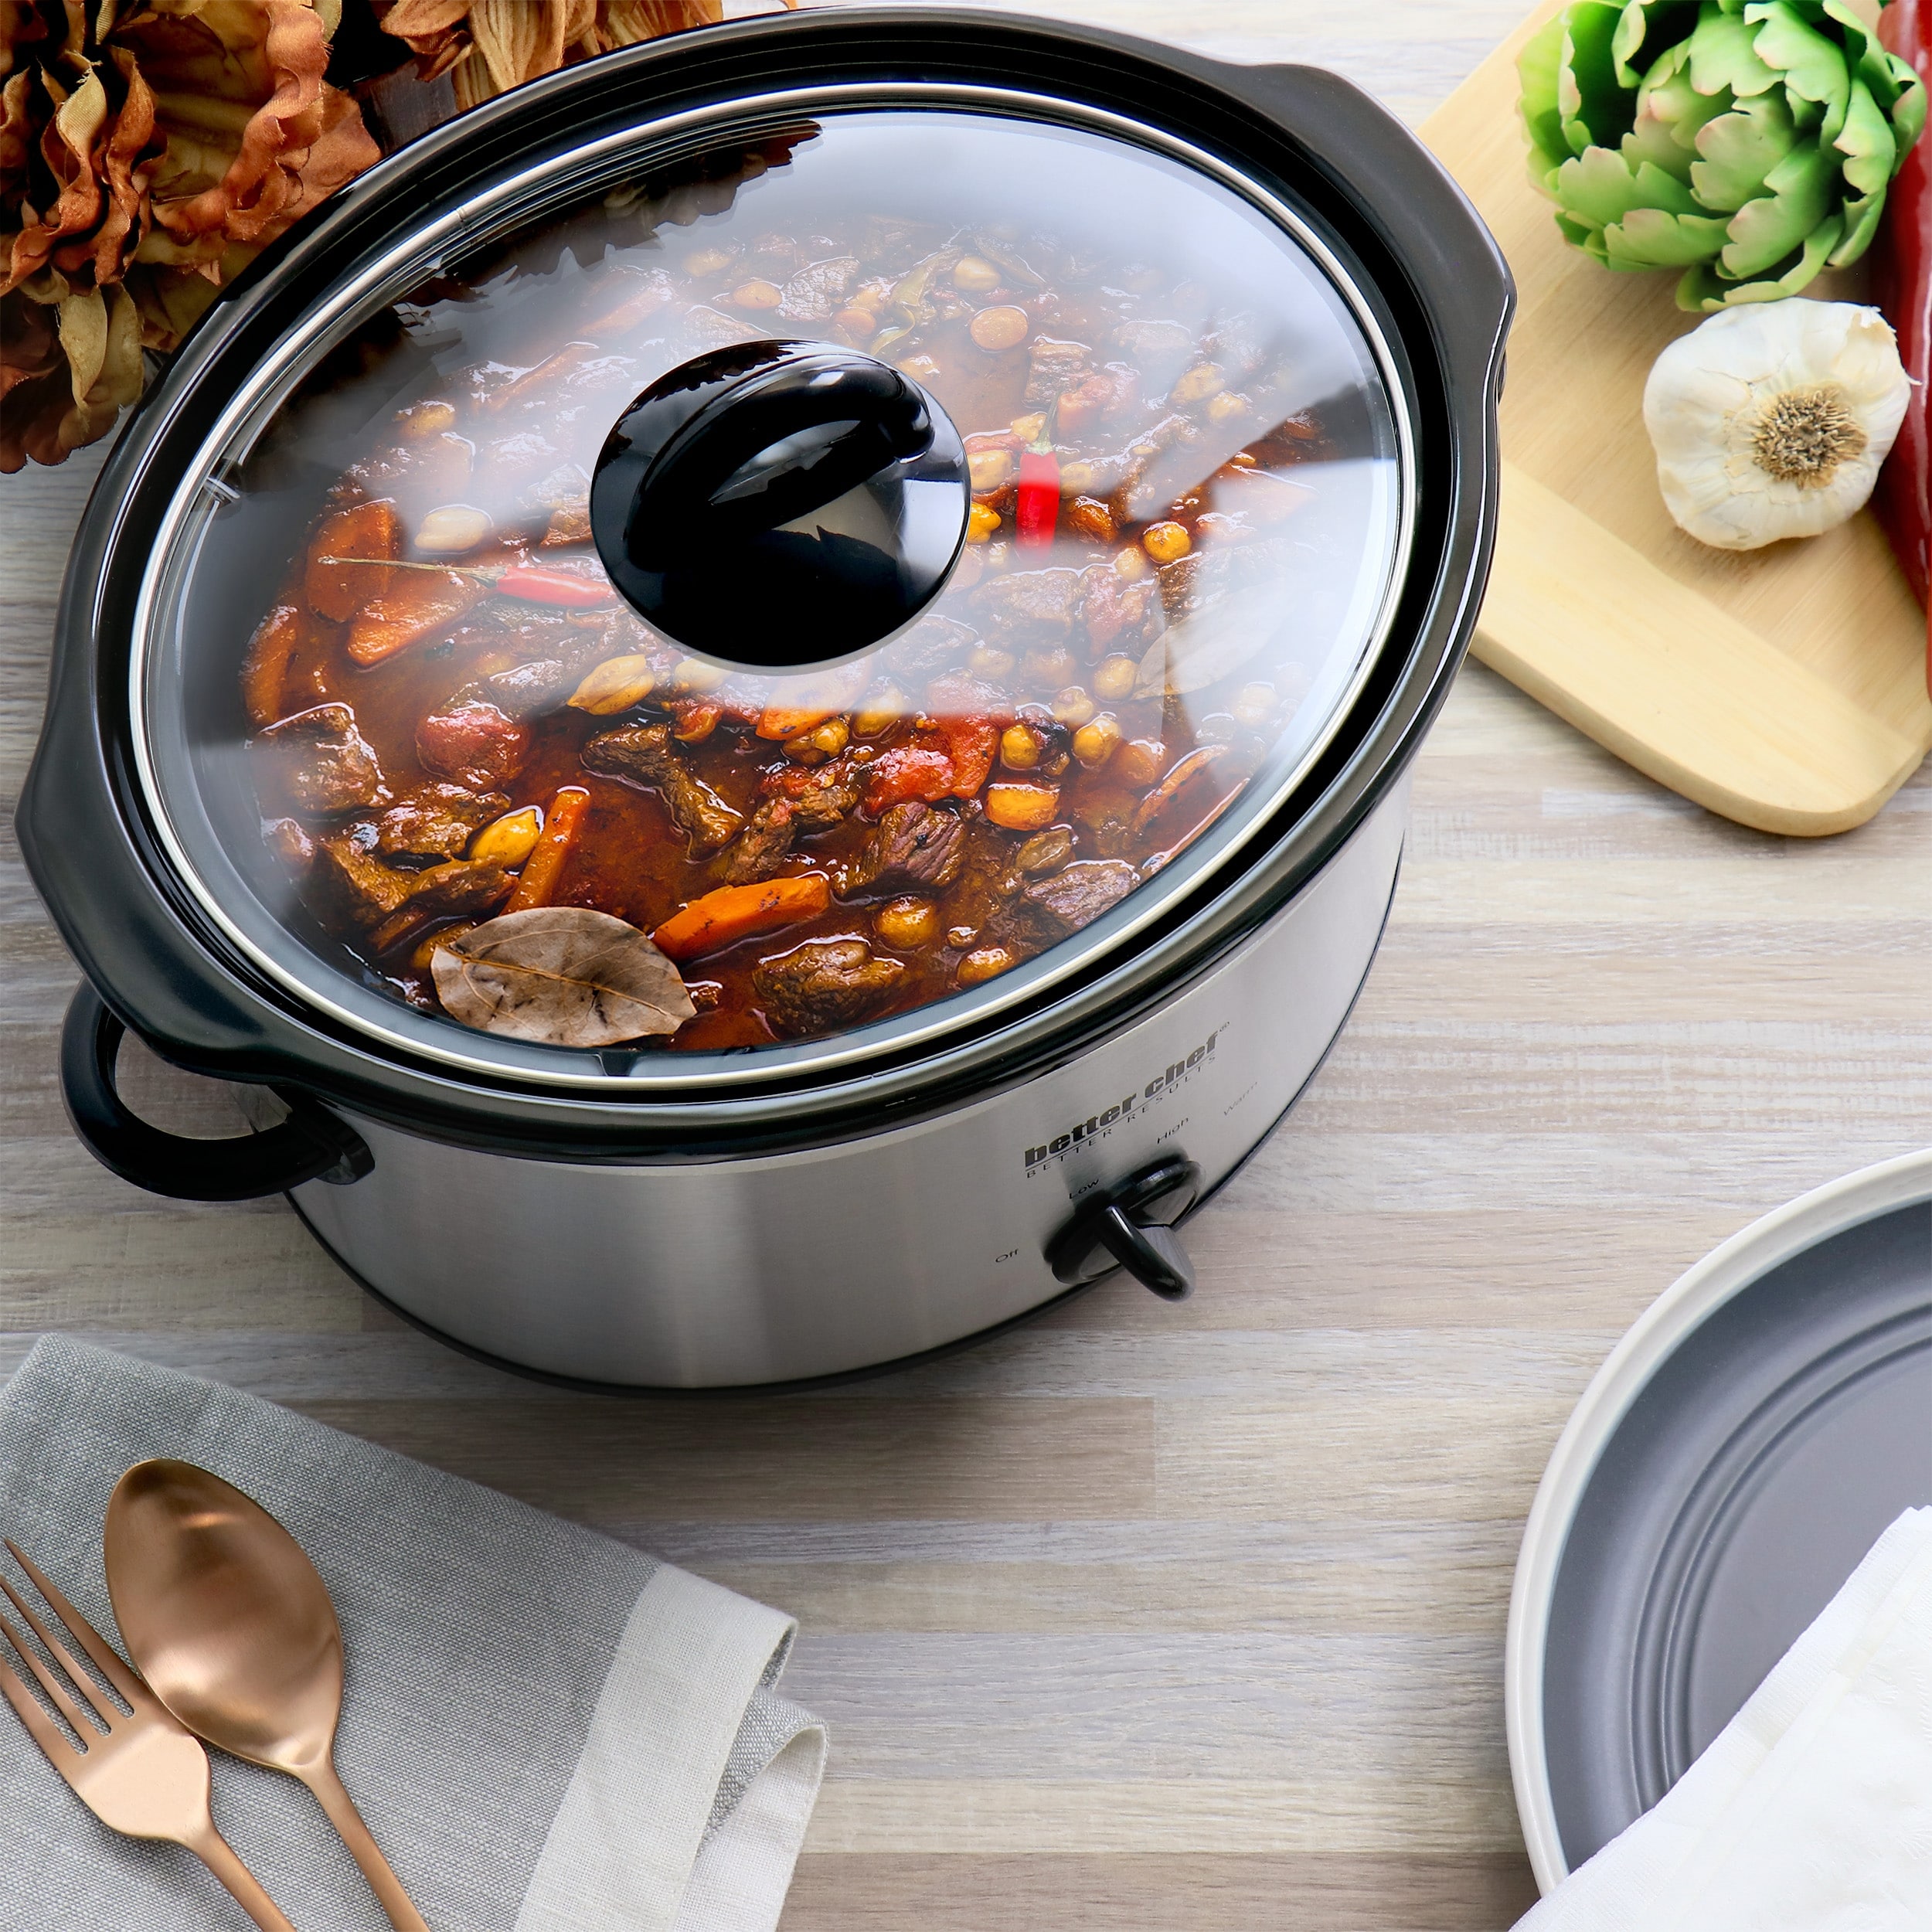 https://ak1.ostkcdn.com/images/products/is/images/direct/a7fe47d0f3998670d2208d20b04865475fcb5884/Better-Chef-4-Quart-Oval-Slow-Cooker-with-Removable-Stoneware-Crock.jpg